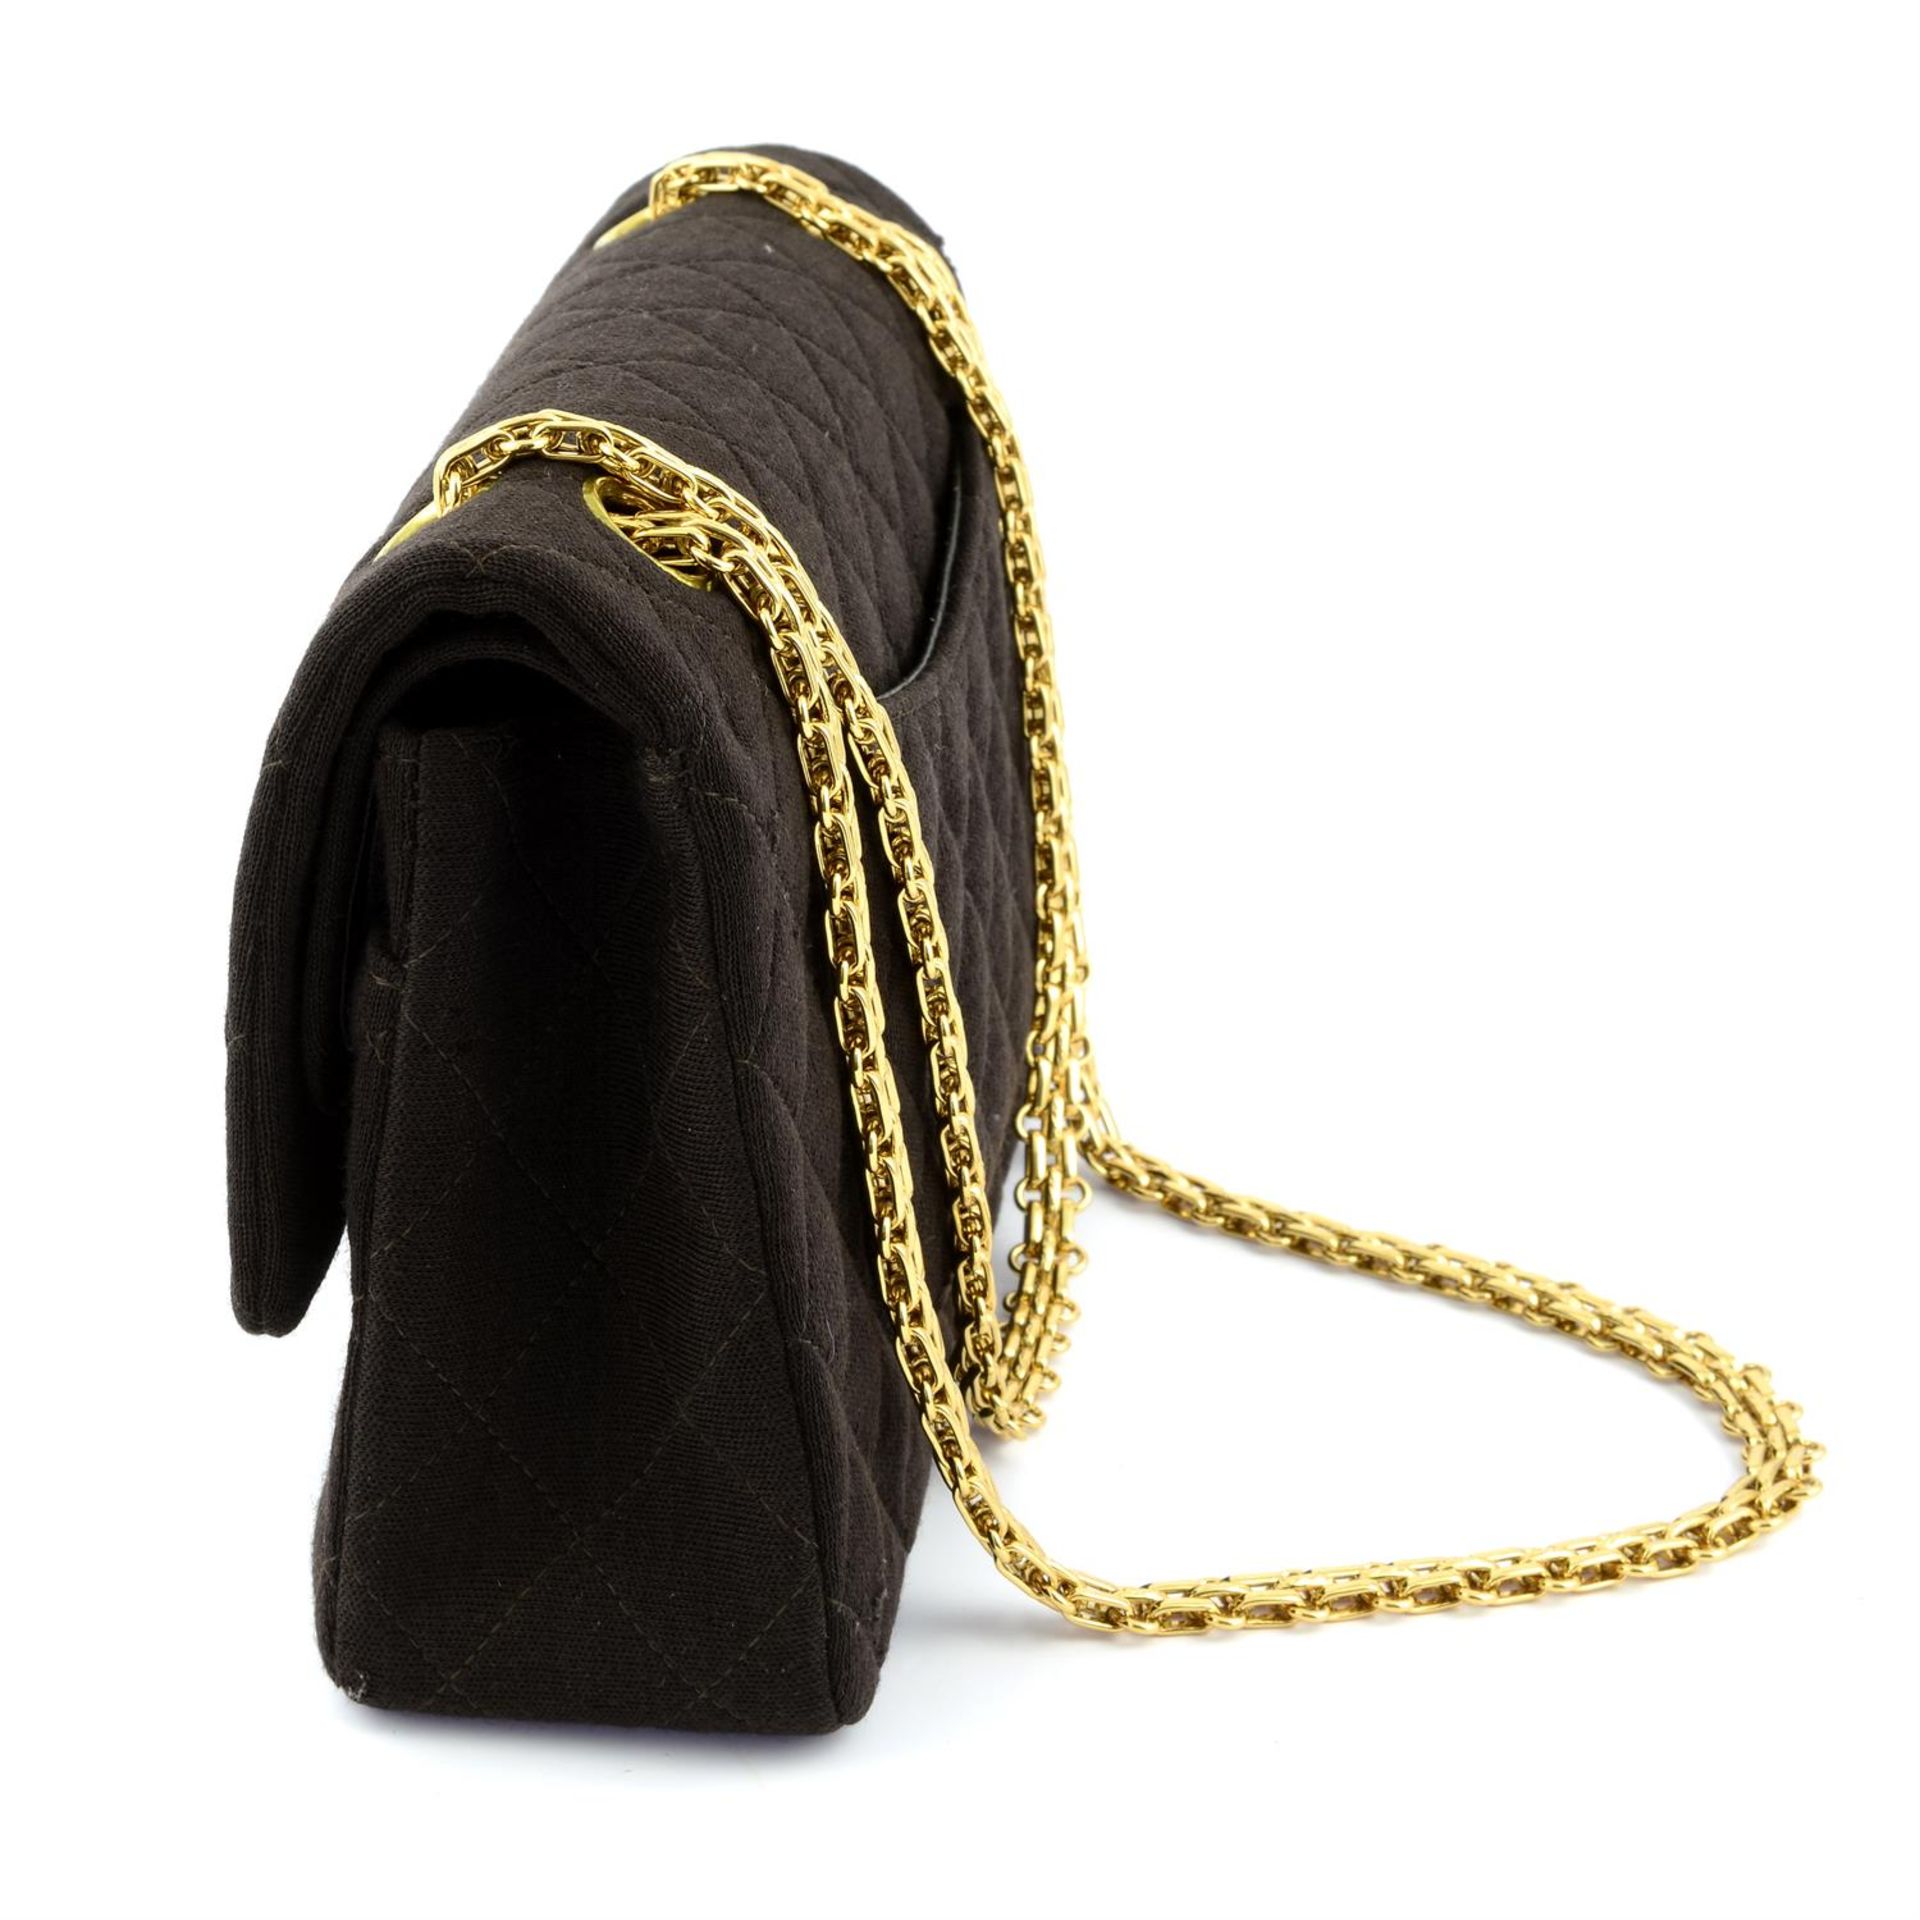 CHANEL - a Jersey fabric Classic double flap handbag. - Image 3 of 6